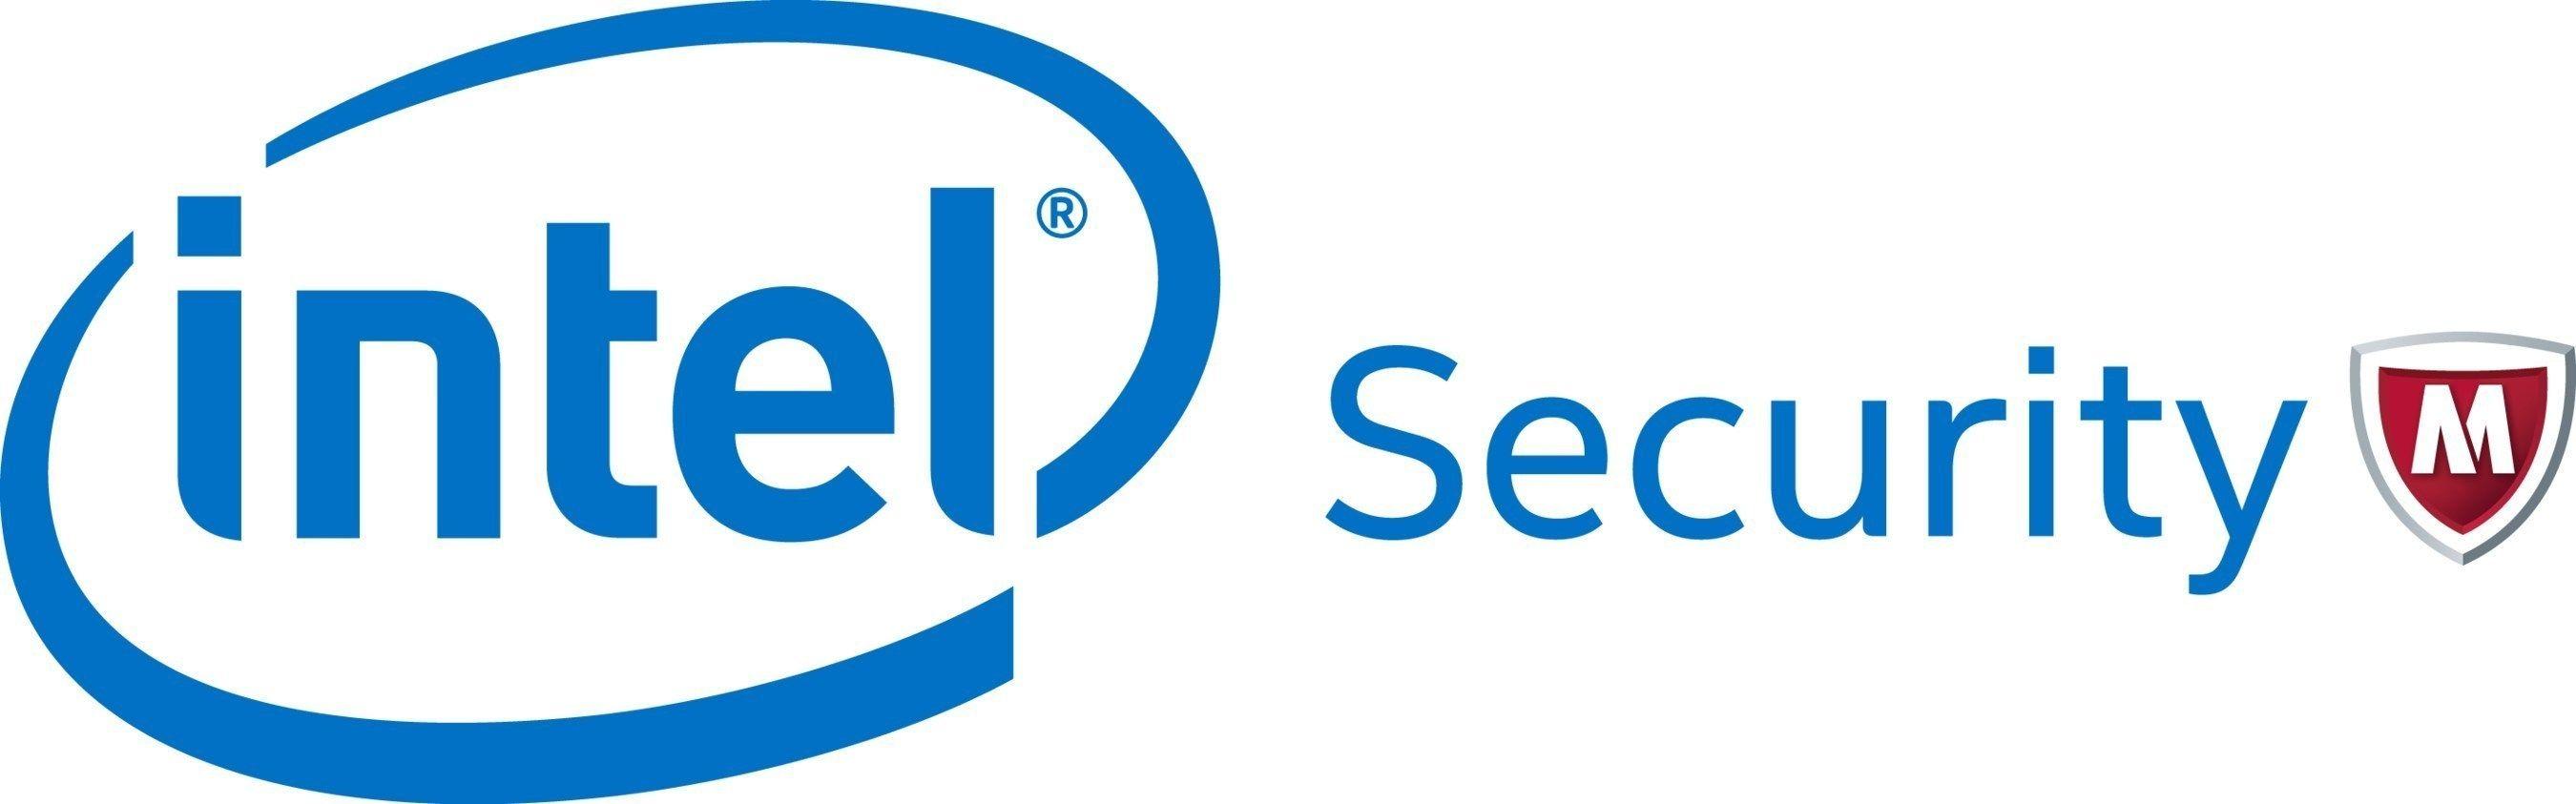 Intel Security Logo - BT And Intel Security Collaborate To Develop Next Generation